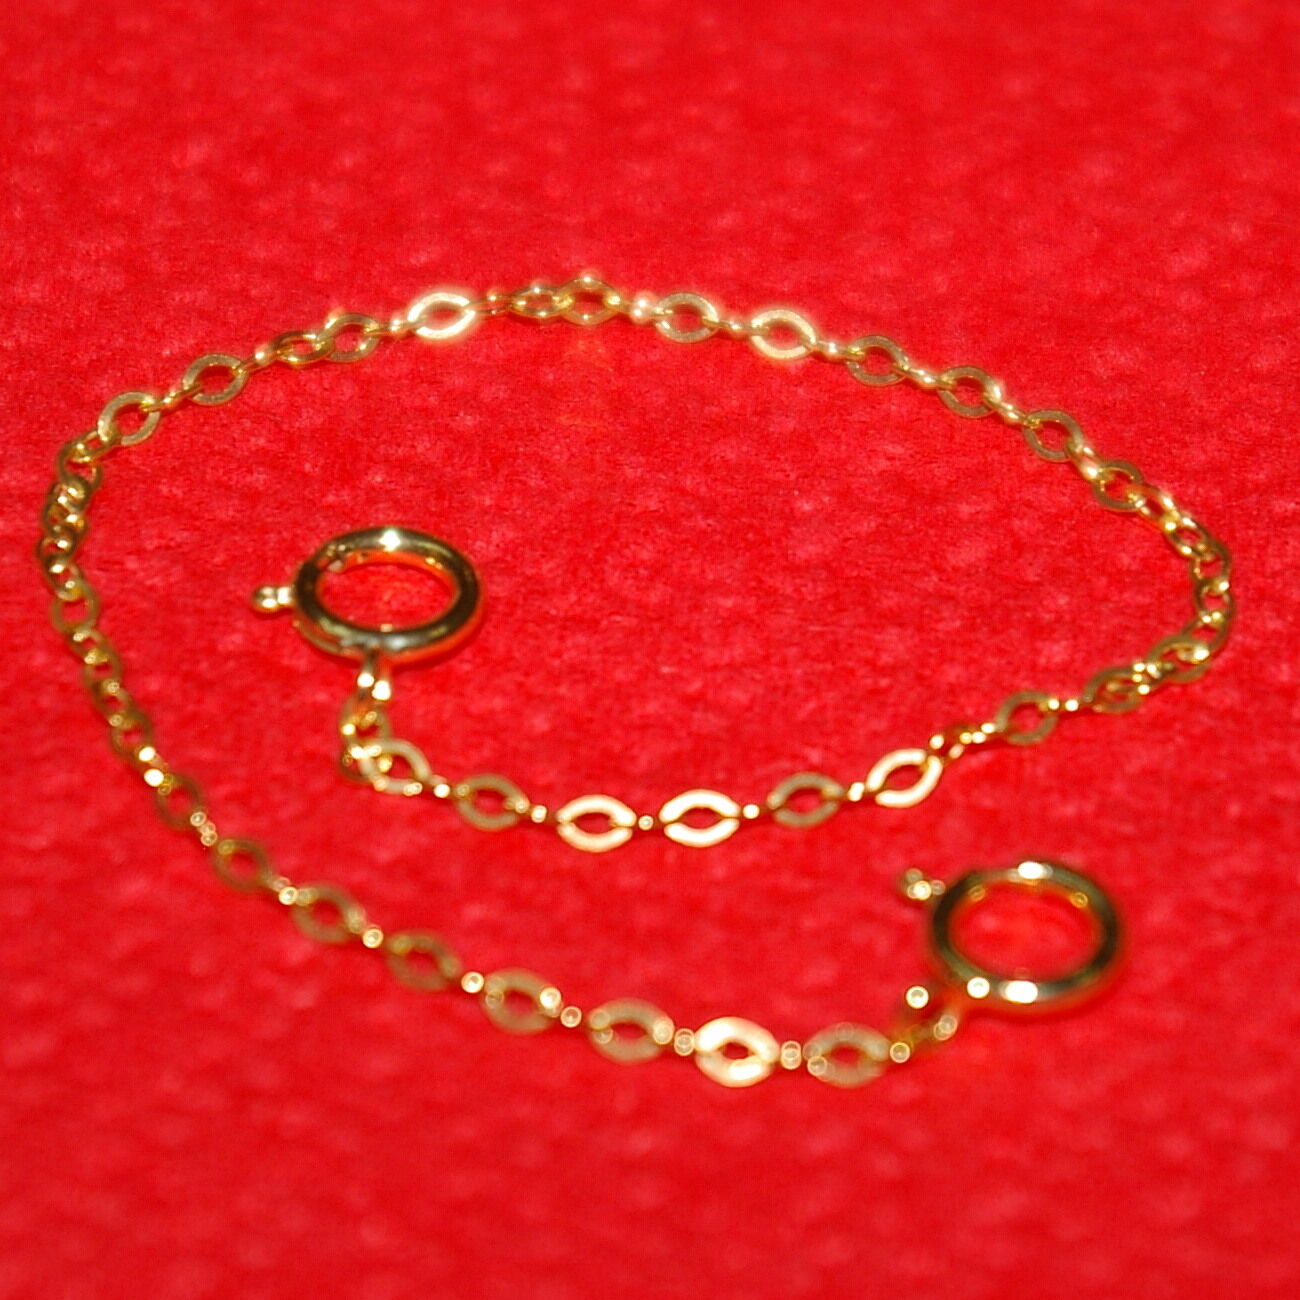 5 pcs 14kt GOLD FILLED 1.5x2mm Flat Cable Chain EXTENDERS with Two Spring Clasps BalliSilver - фотография #10